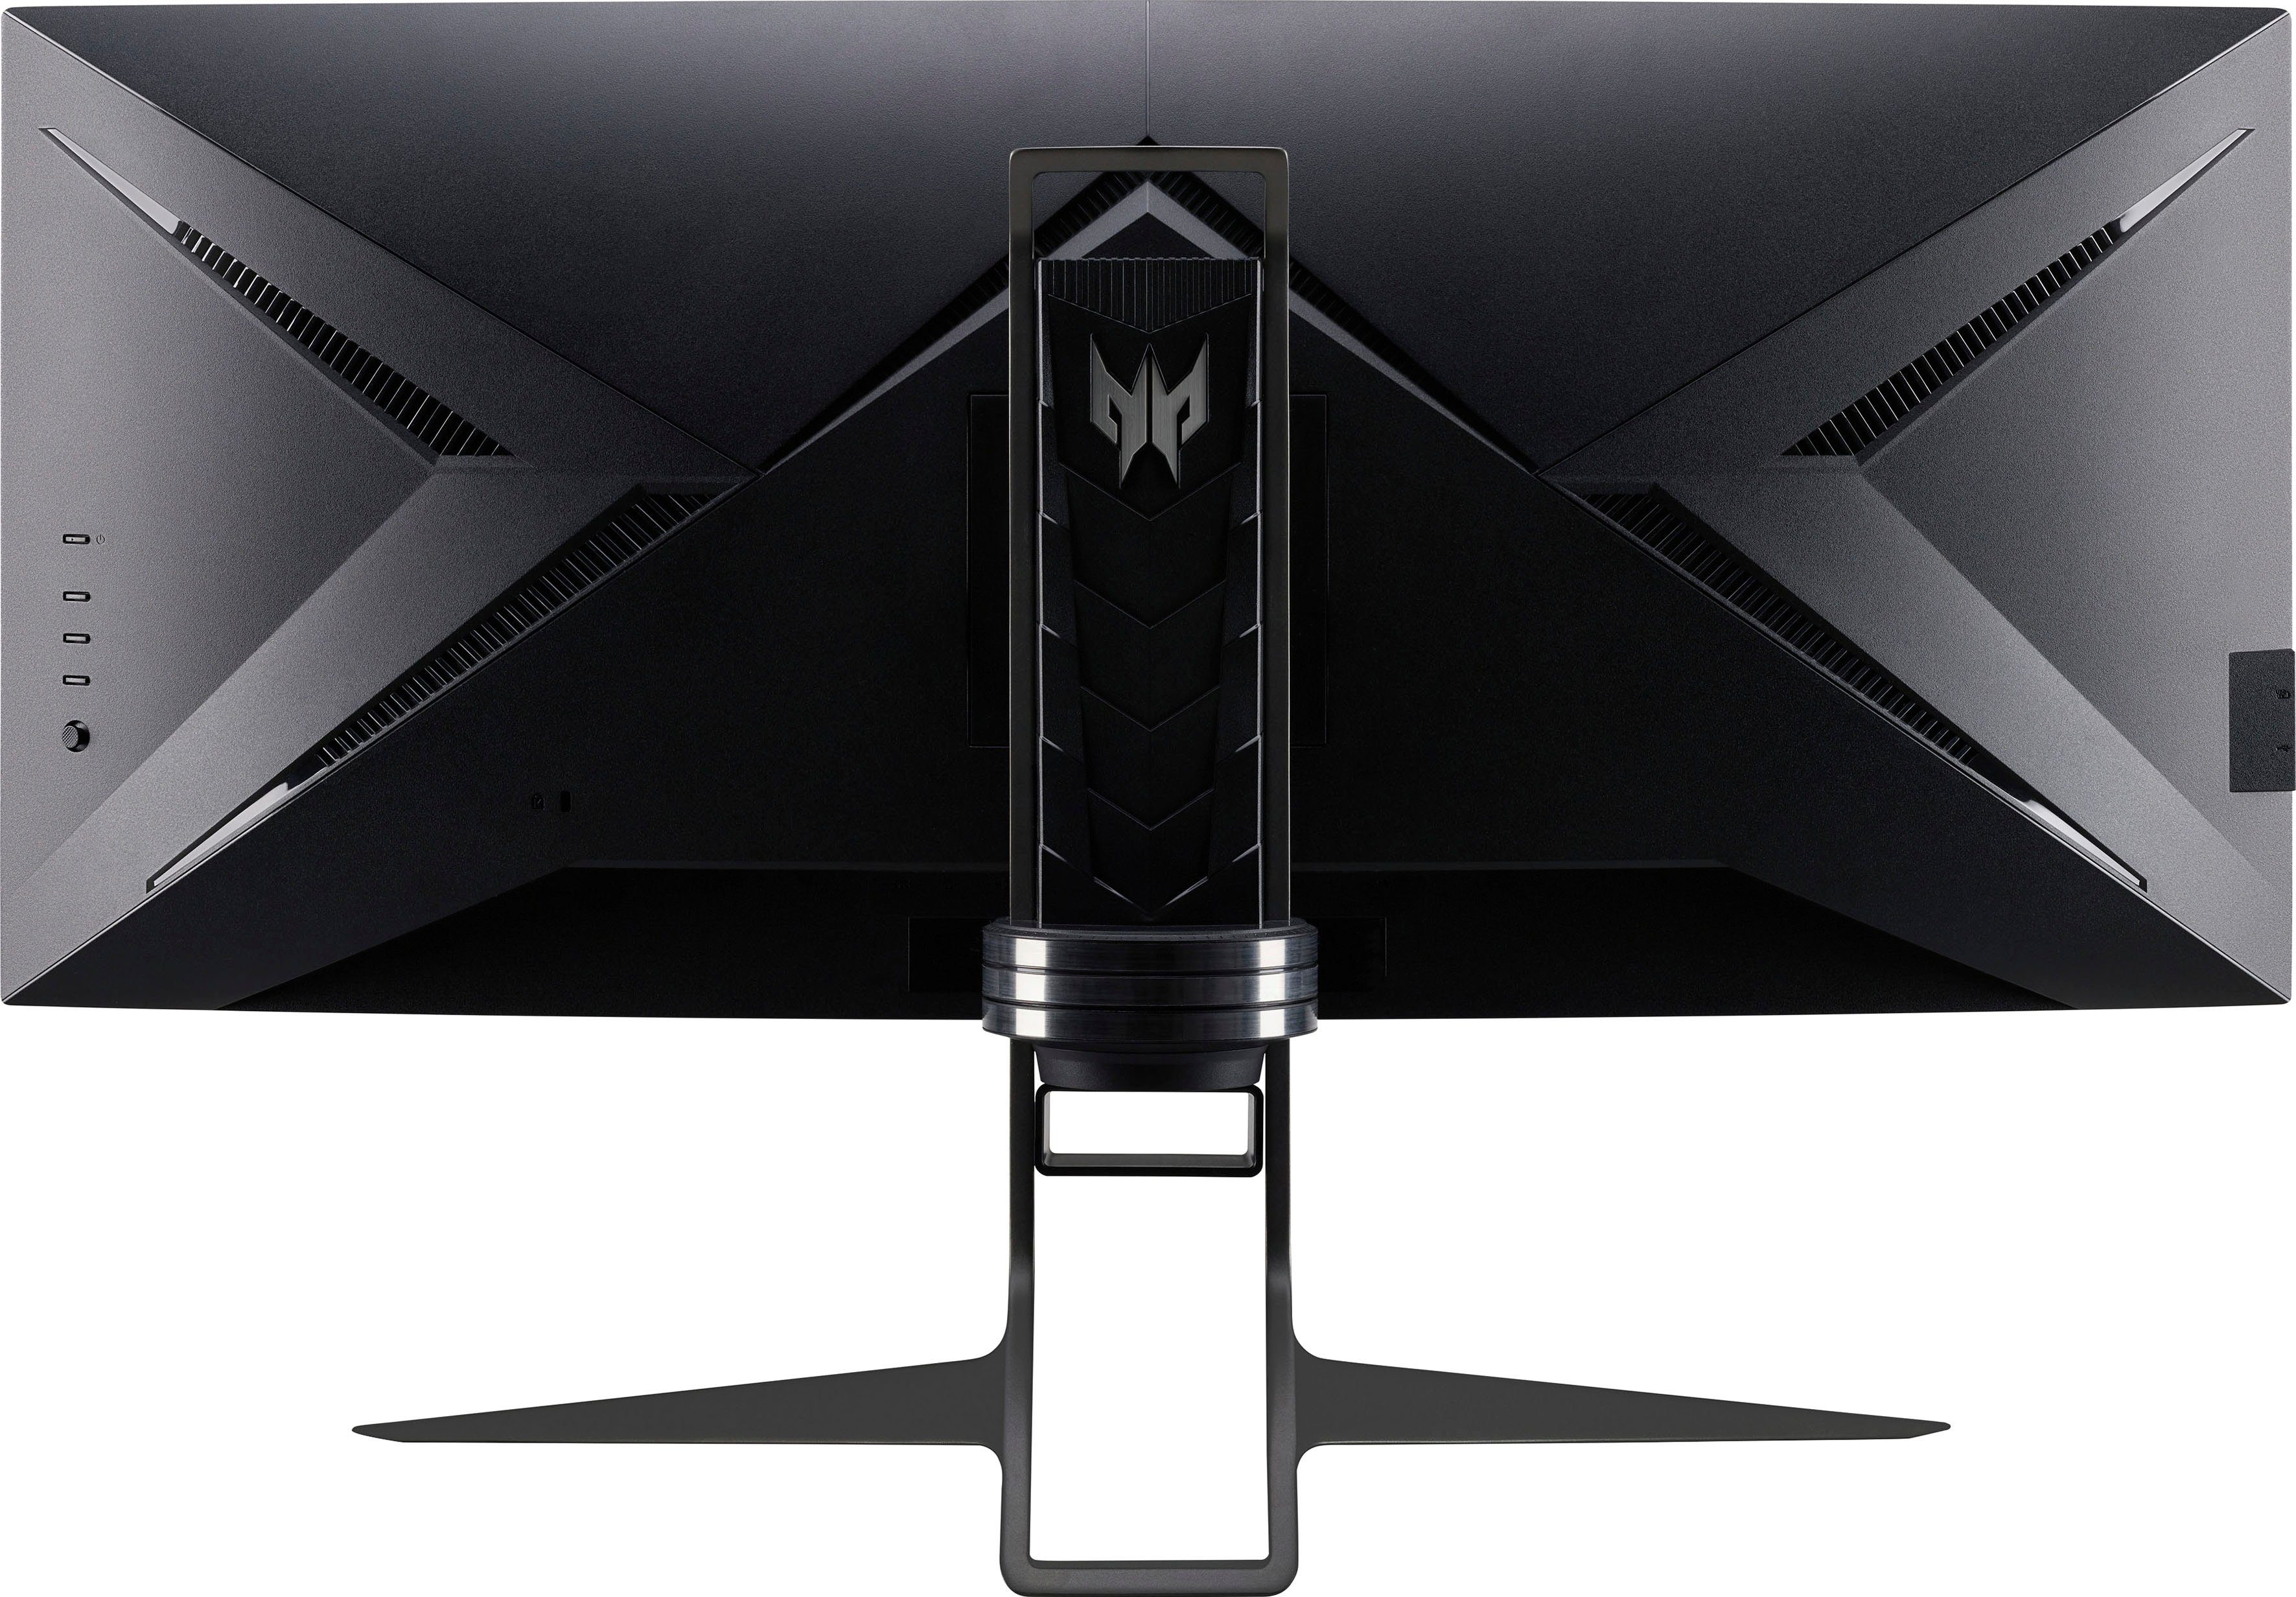 Acer Predator Reaktionszeit, ms ", Curved-Gaming-LED-Monitor px, IPS-LED) 0,5 x (86,4 1440 X34GS 3440 cm/34 180 Hz